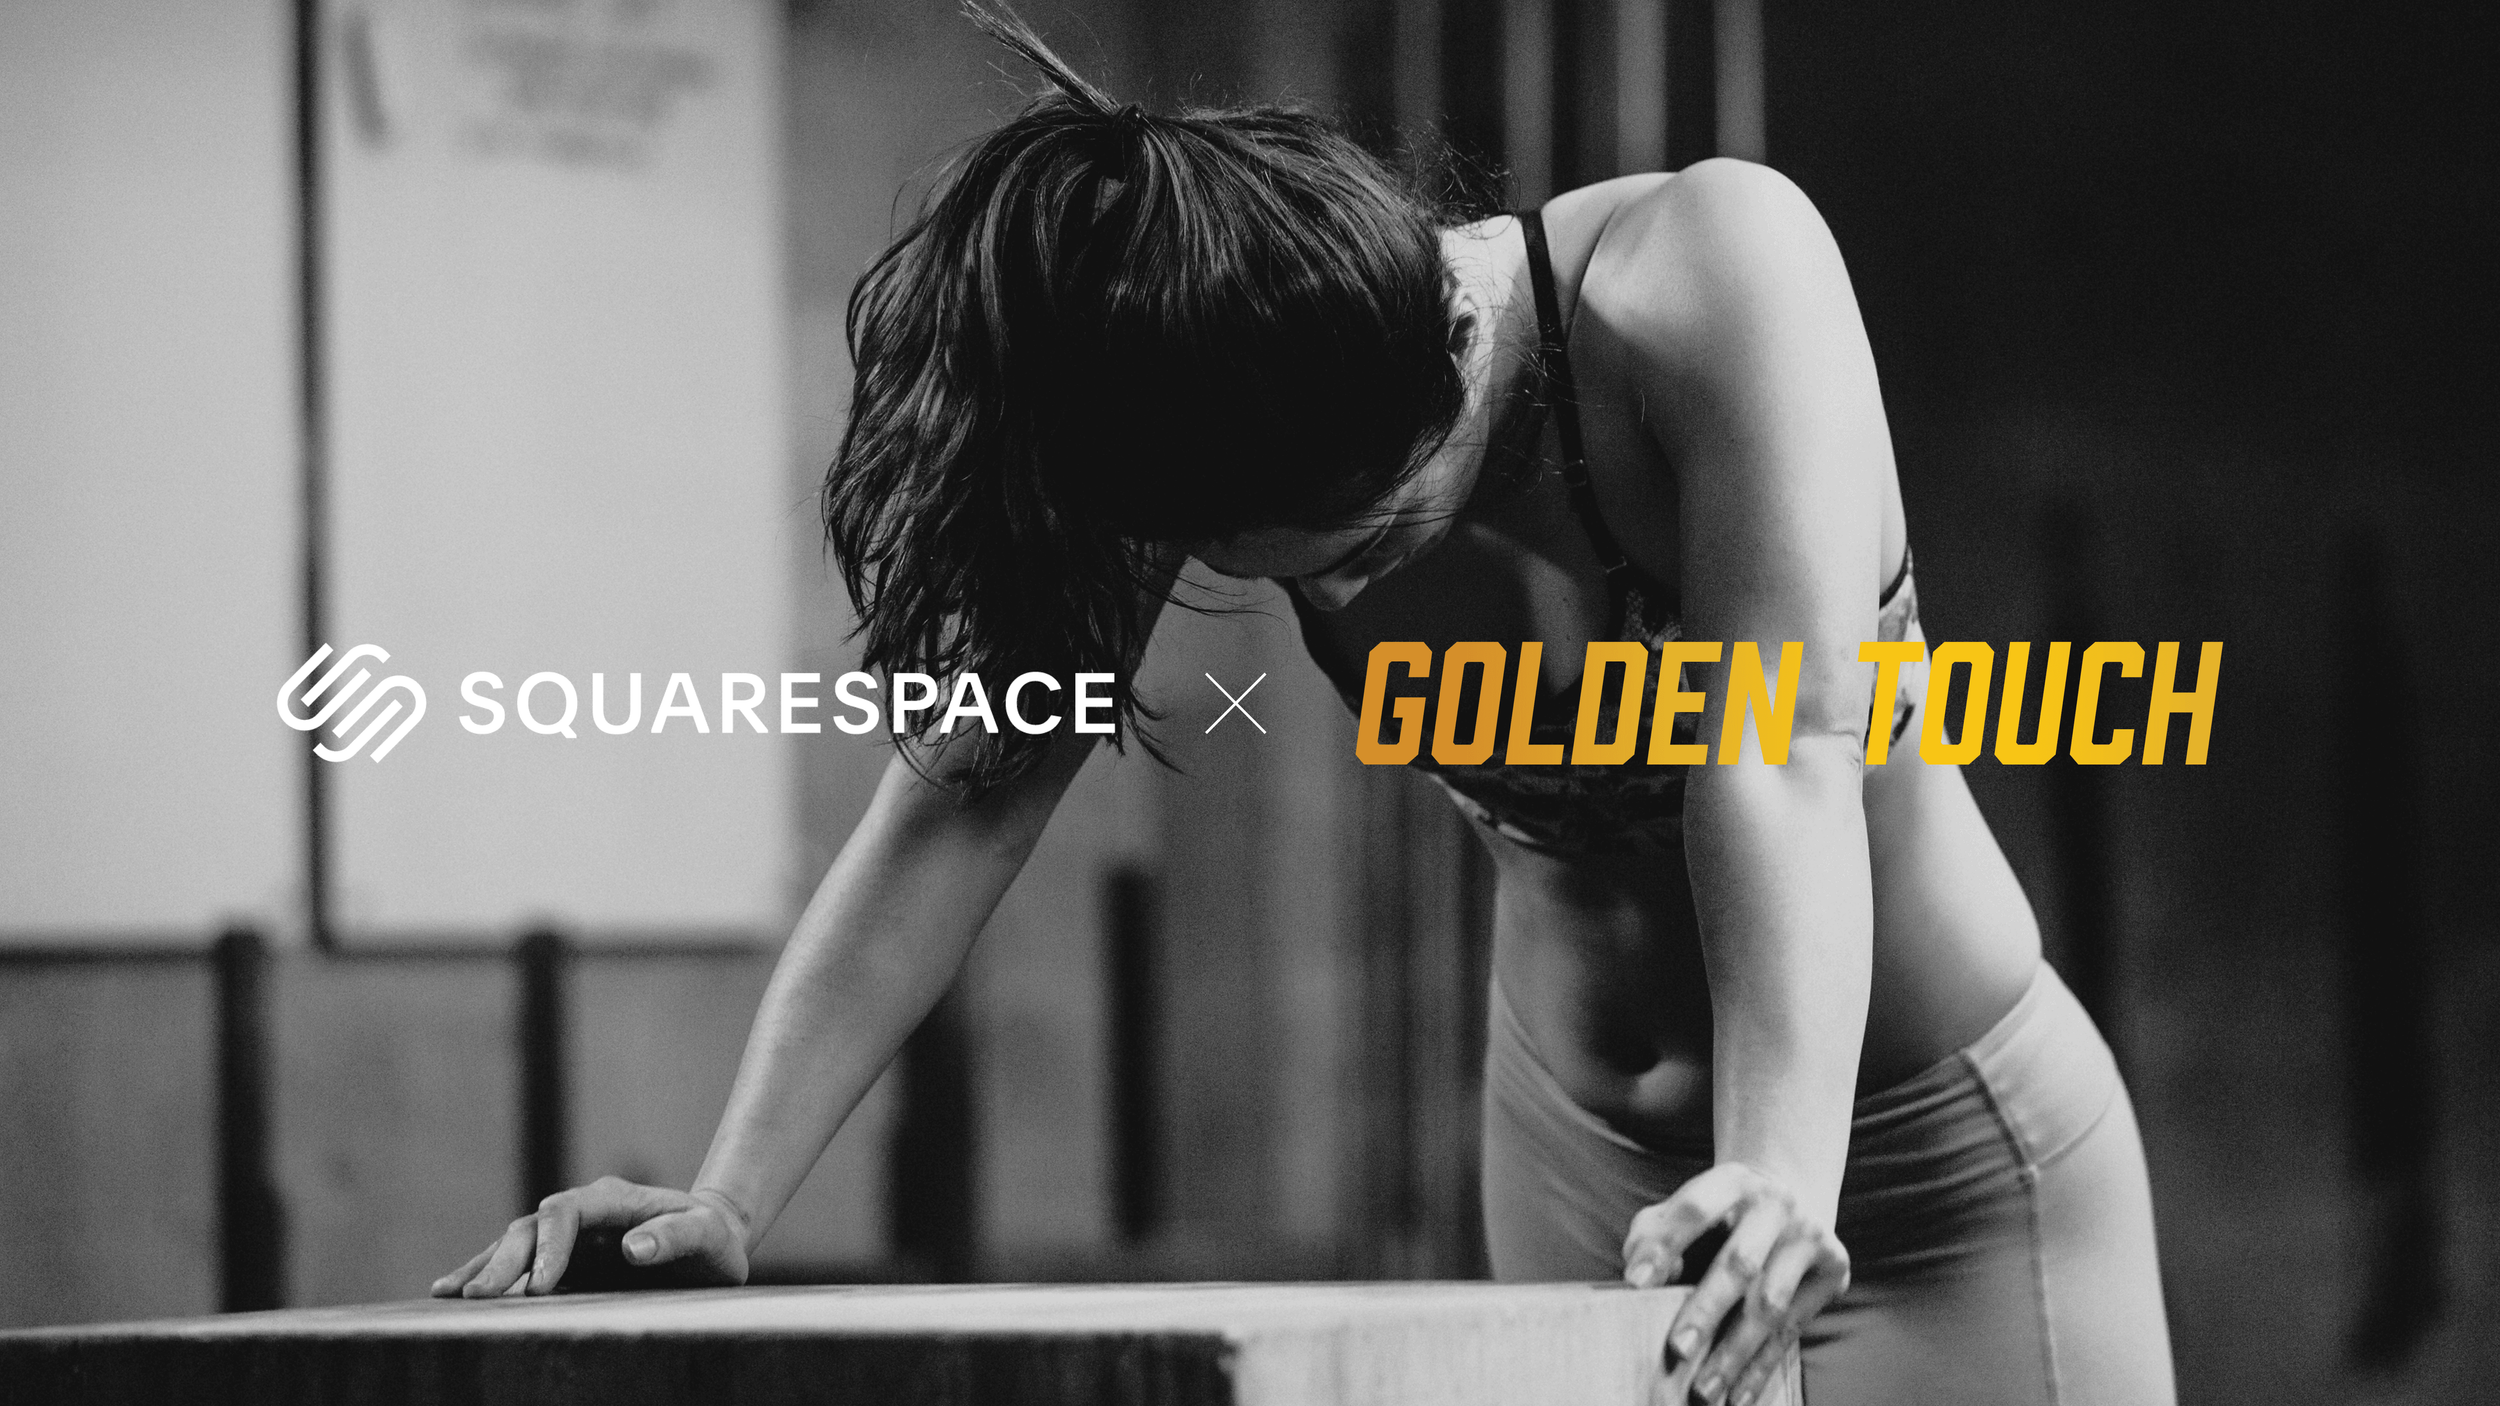 young female athlete with Squarespace and Golden Touch logos